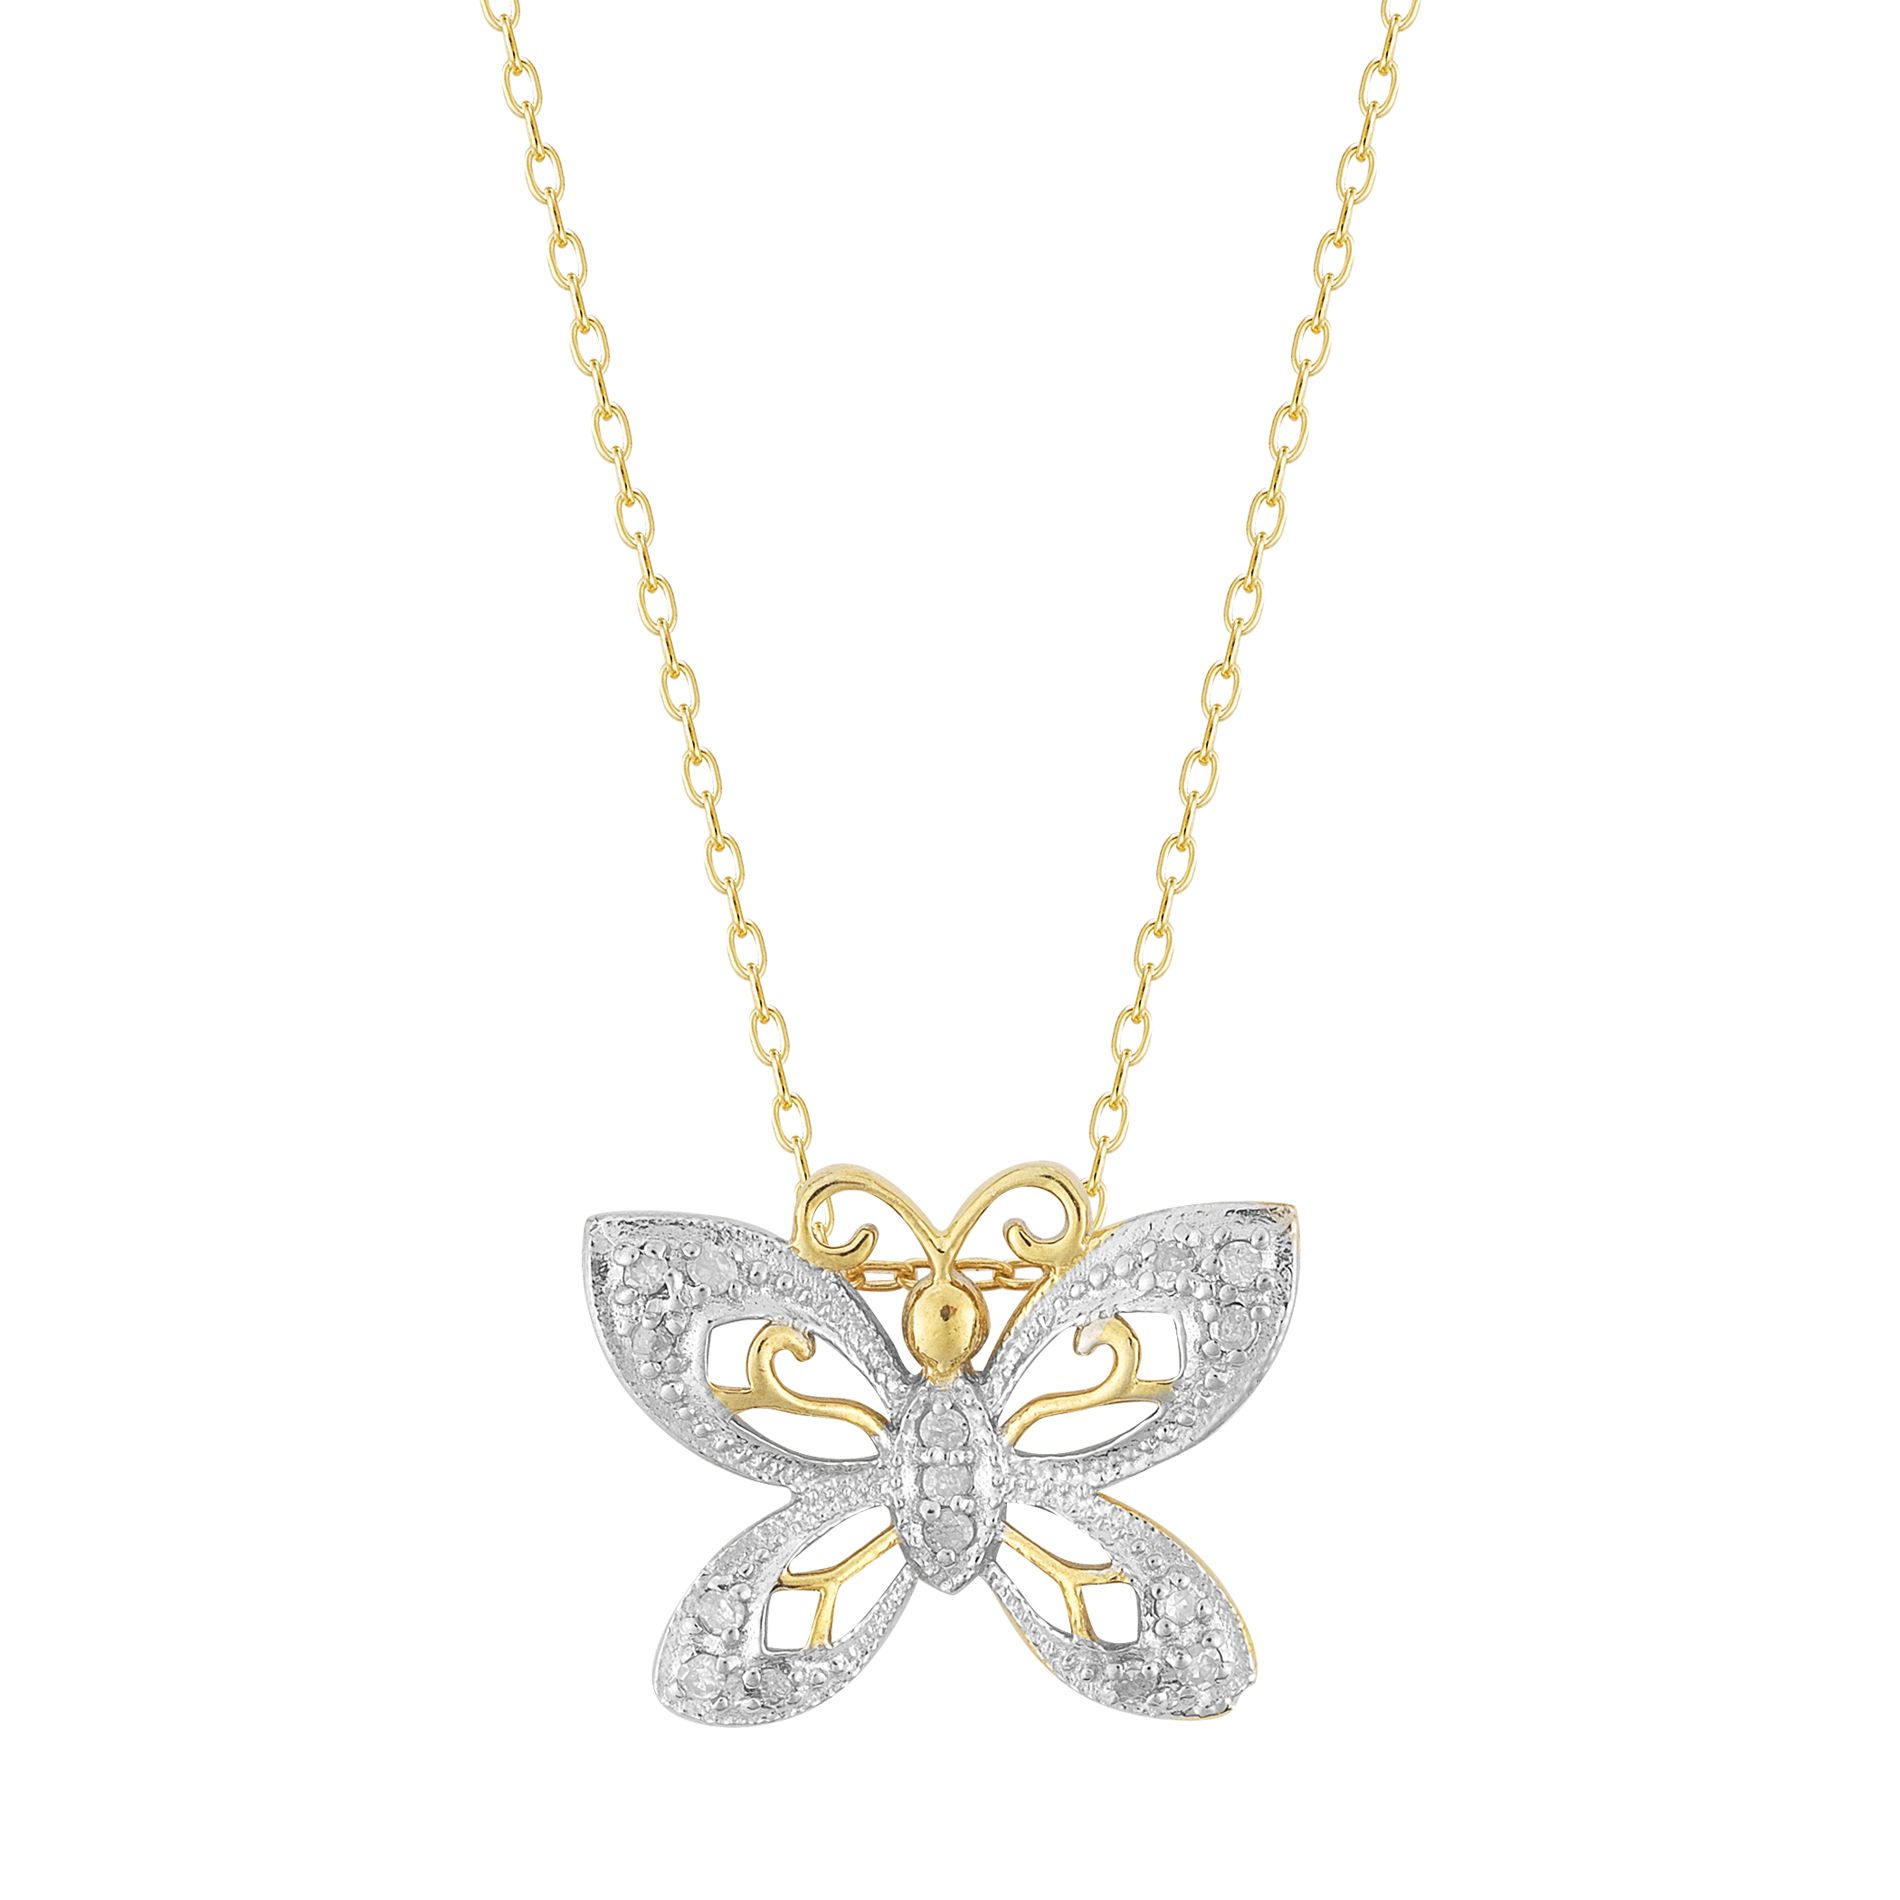 Avance 18Kt Gold Over Sterling Silver 1/10Cttw Diamond Butterfly